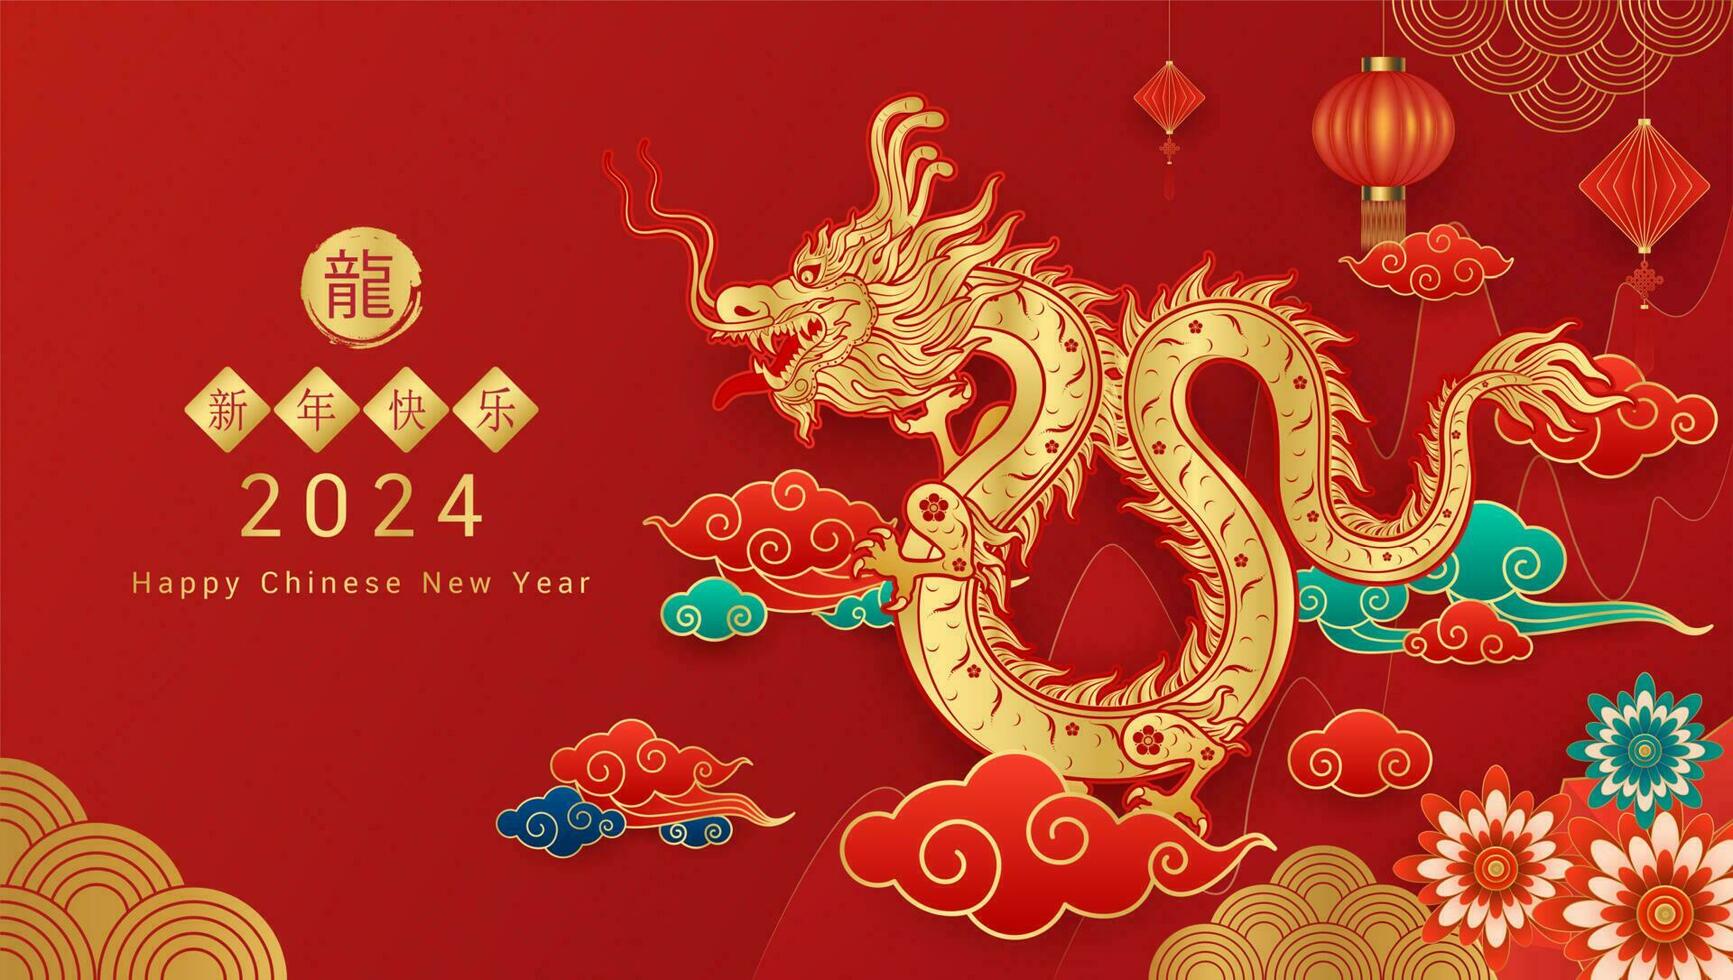 Happy Chinese New Year 2024. Chinese dragon gold zodiac sign on red